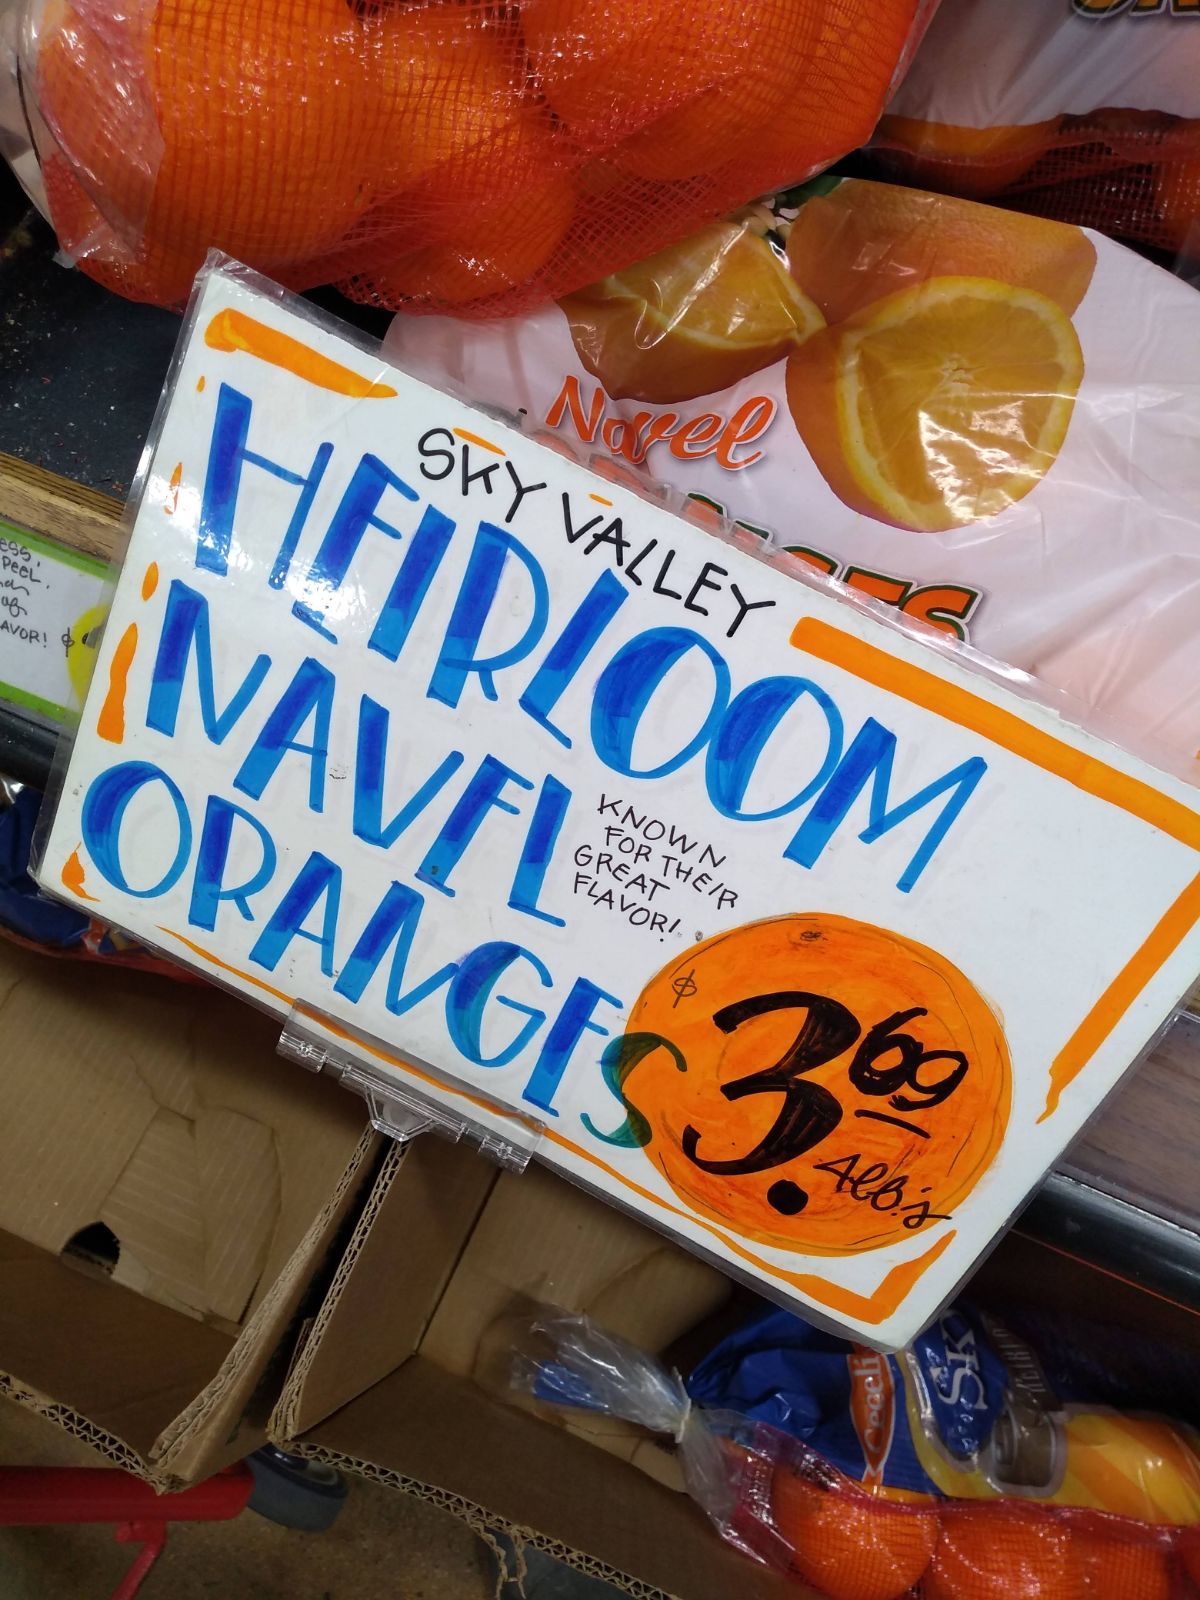 A sign at  Trader Joe's that says Sky Valley Heirloom Navel Oranges Known for their great flavor. $3.69 for a 4 lb bag.